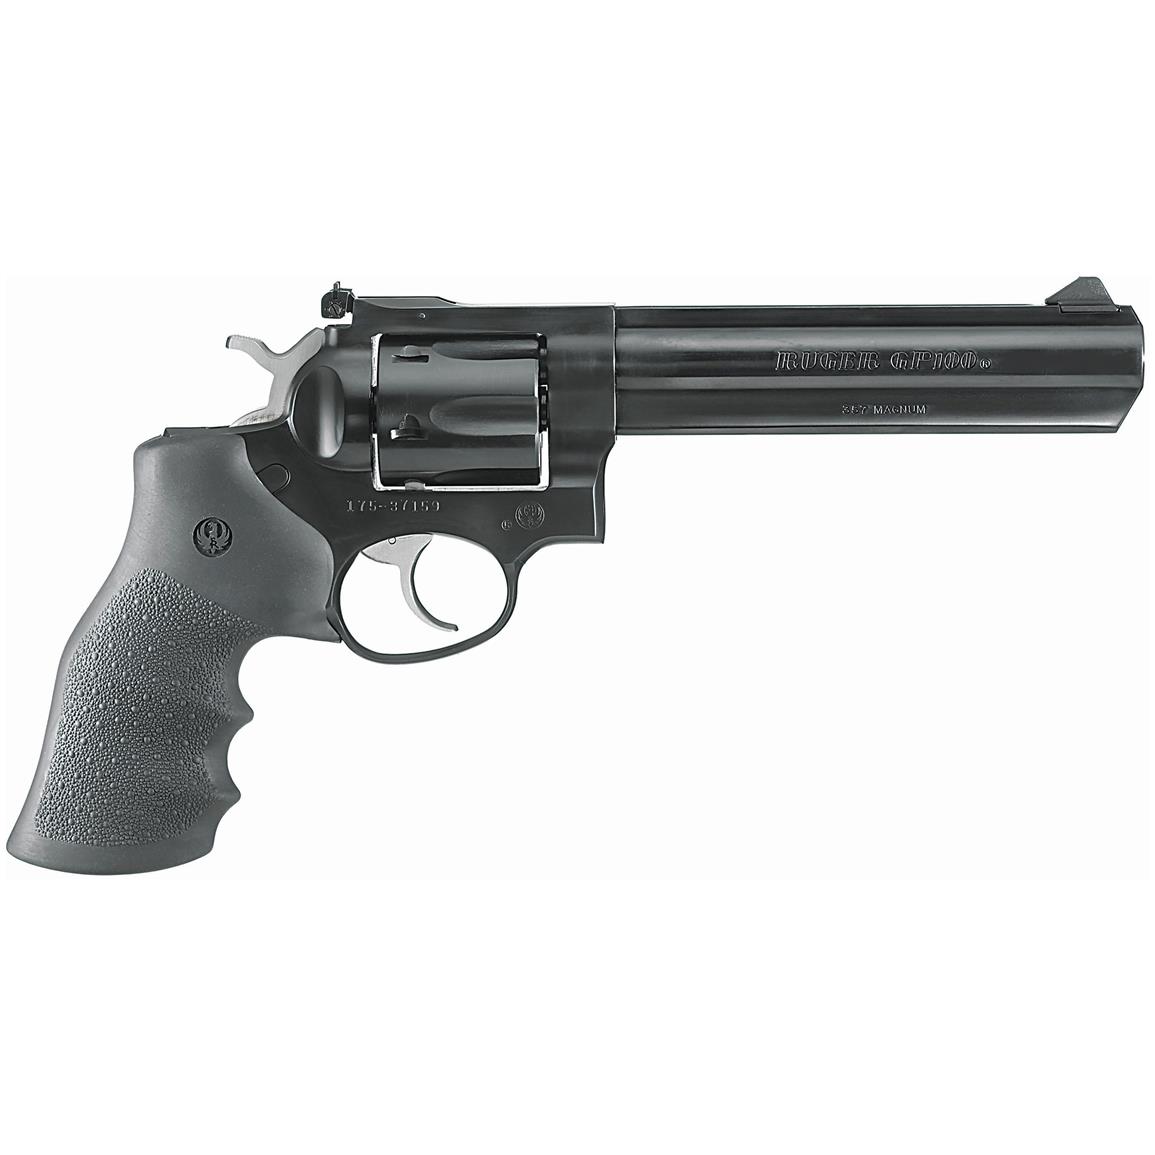 Ruger Gp100 Double Action 357 Magnum 6 Barrel 6 Rounds 637706